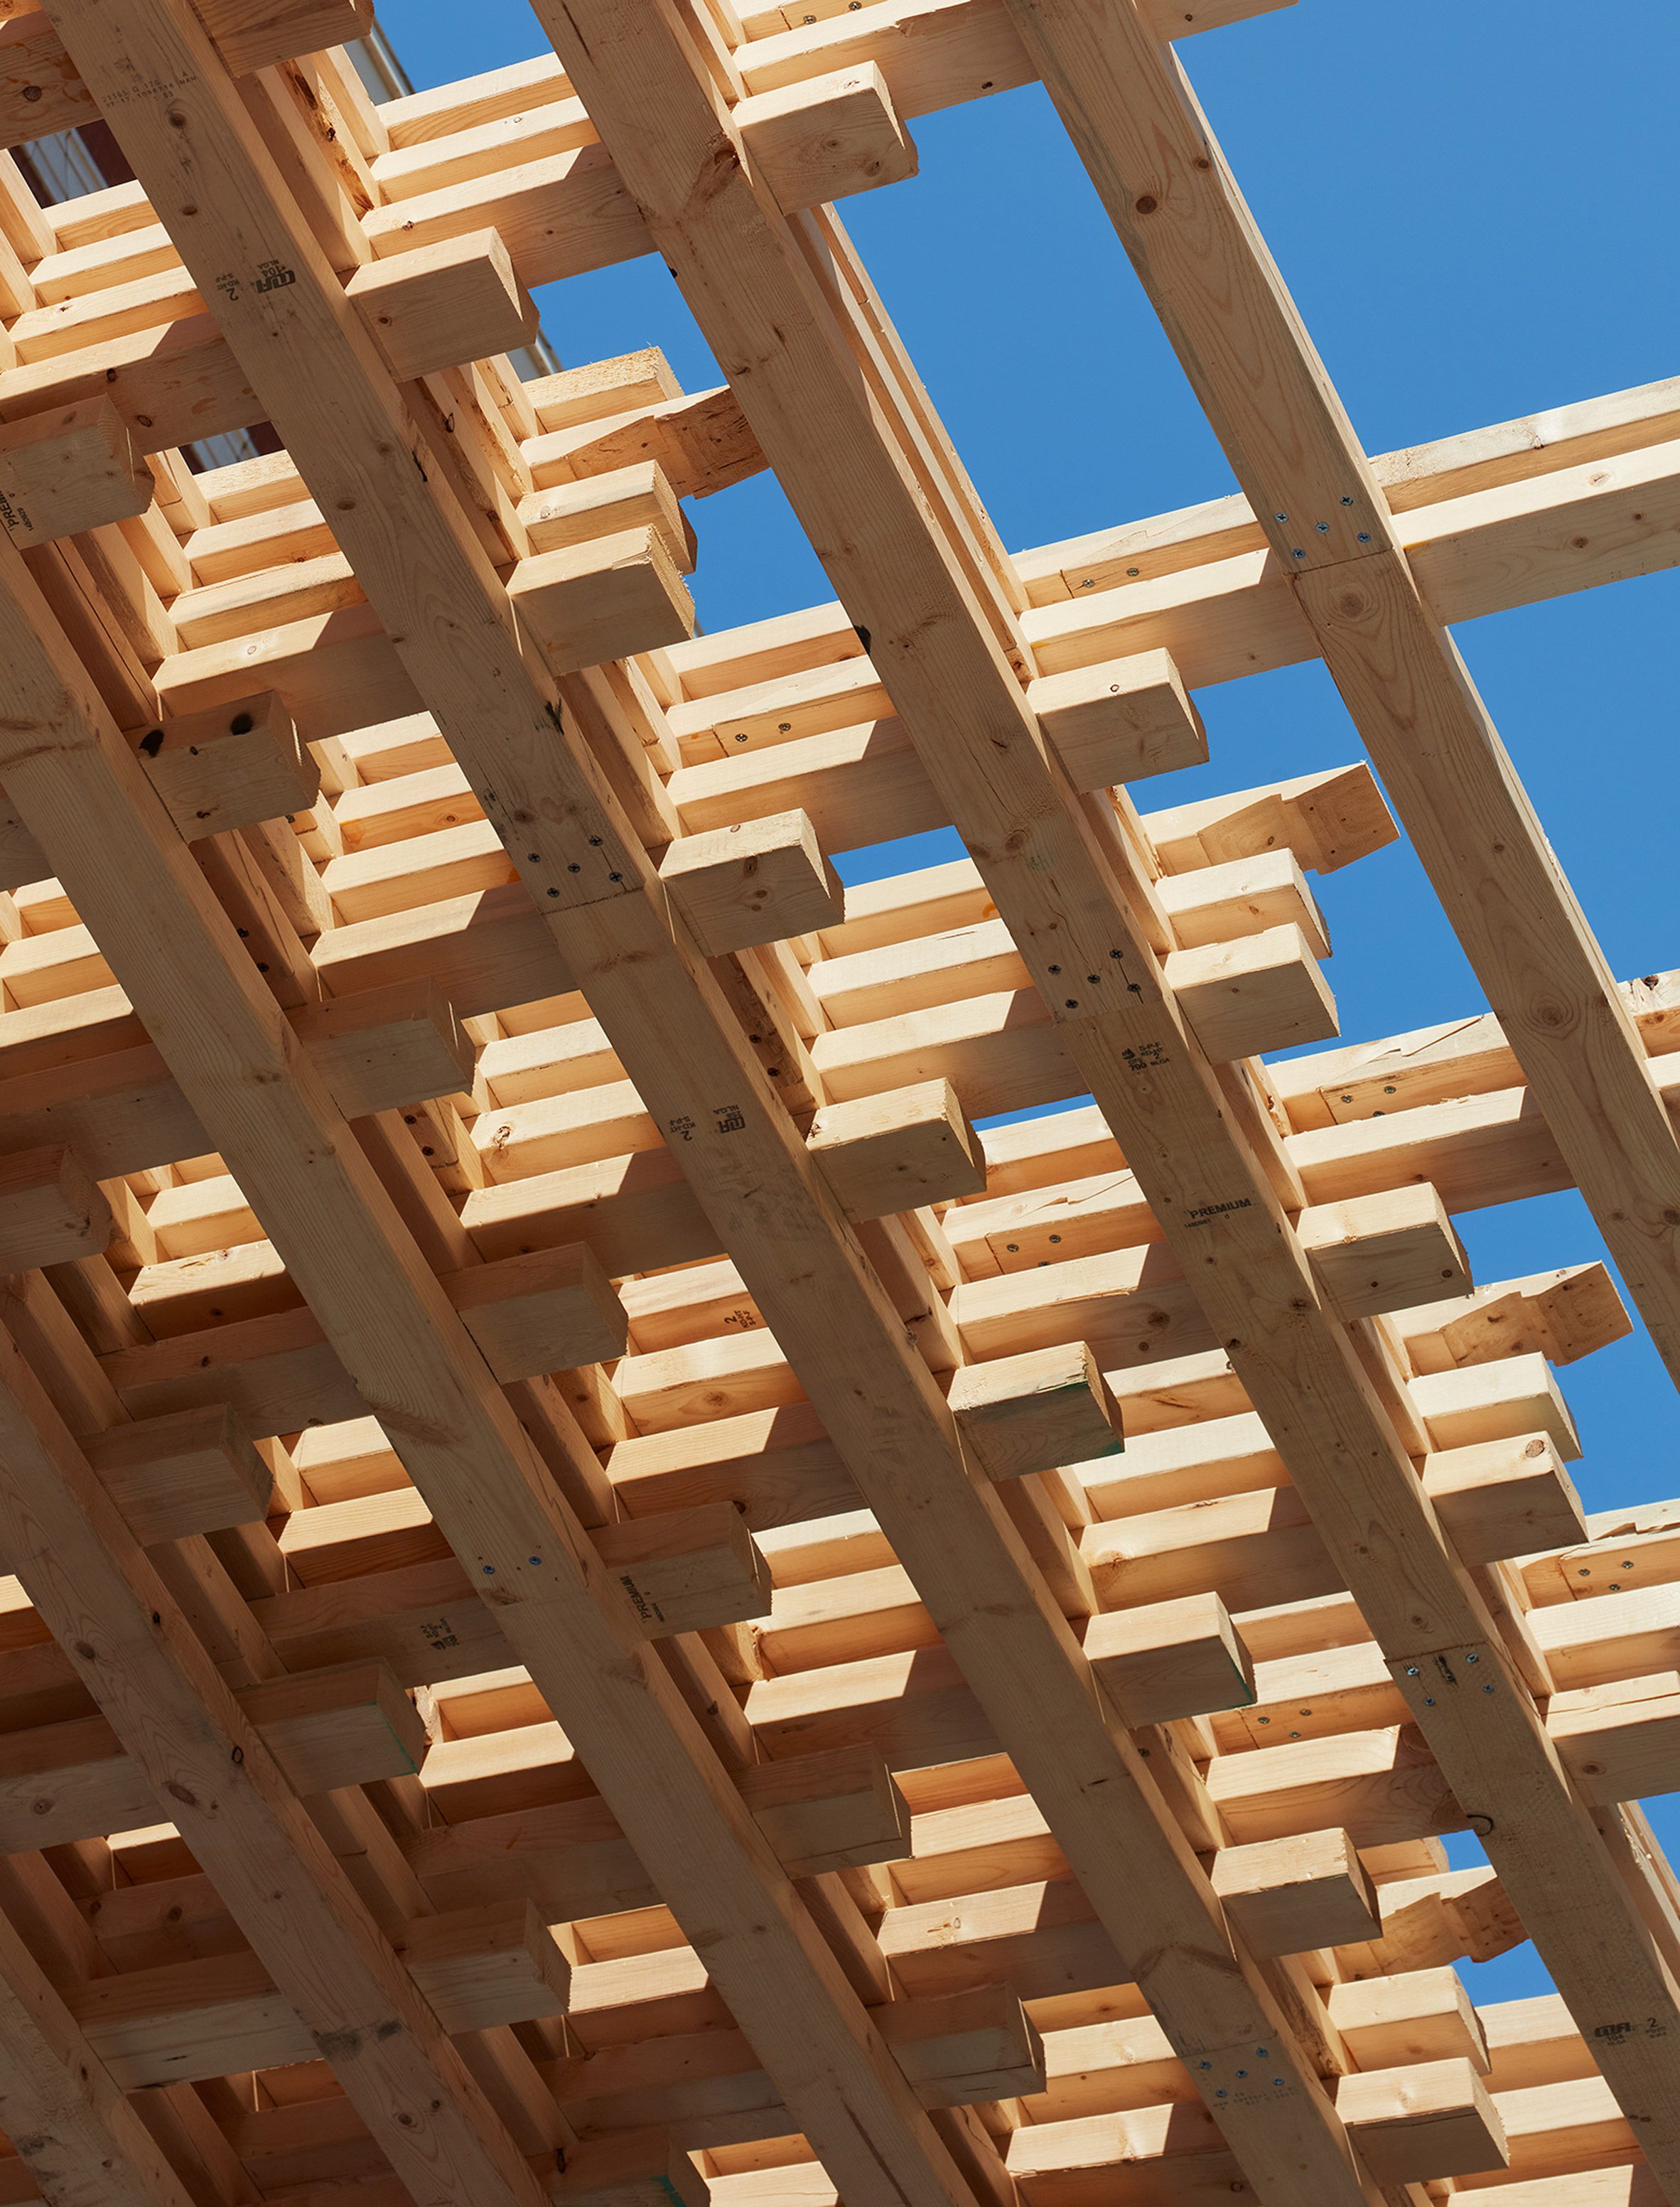 Interlocking wood pieces forming a spatially laminated timber structure by SOM architects